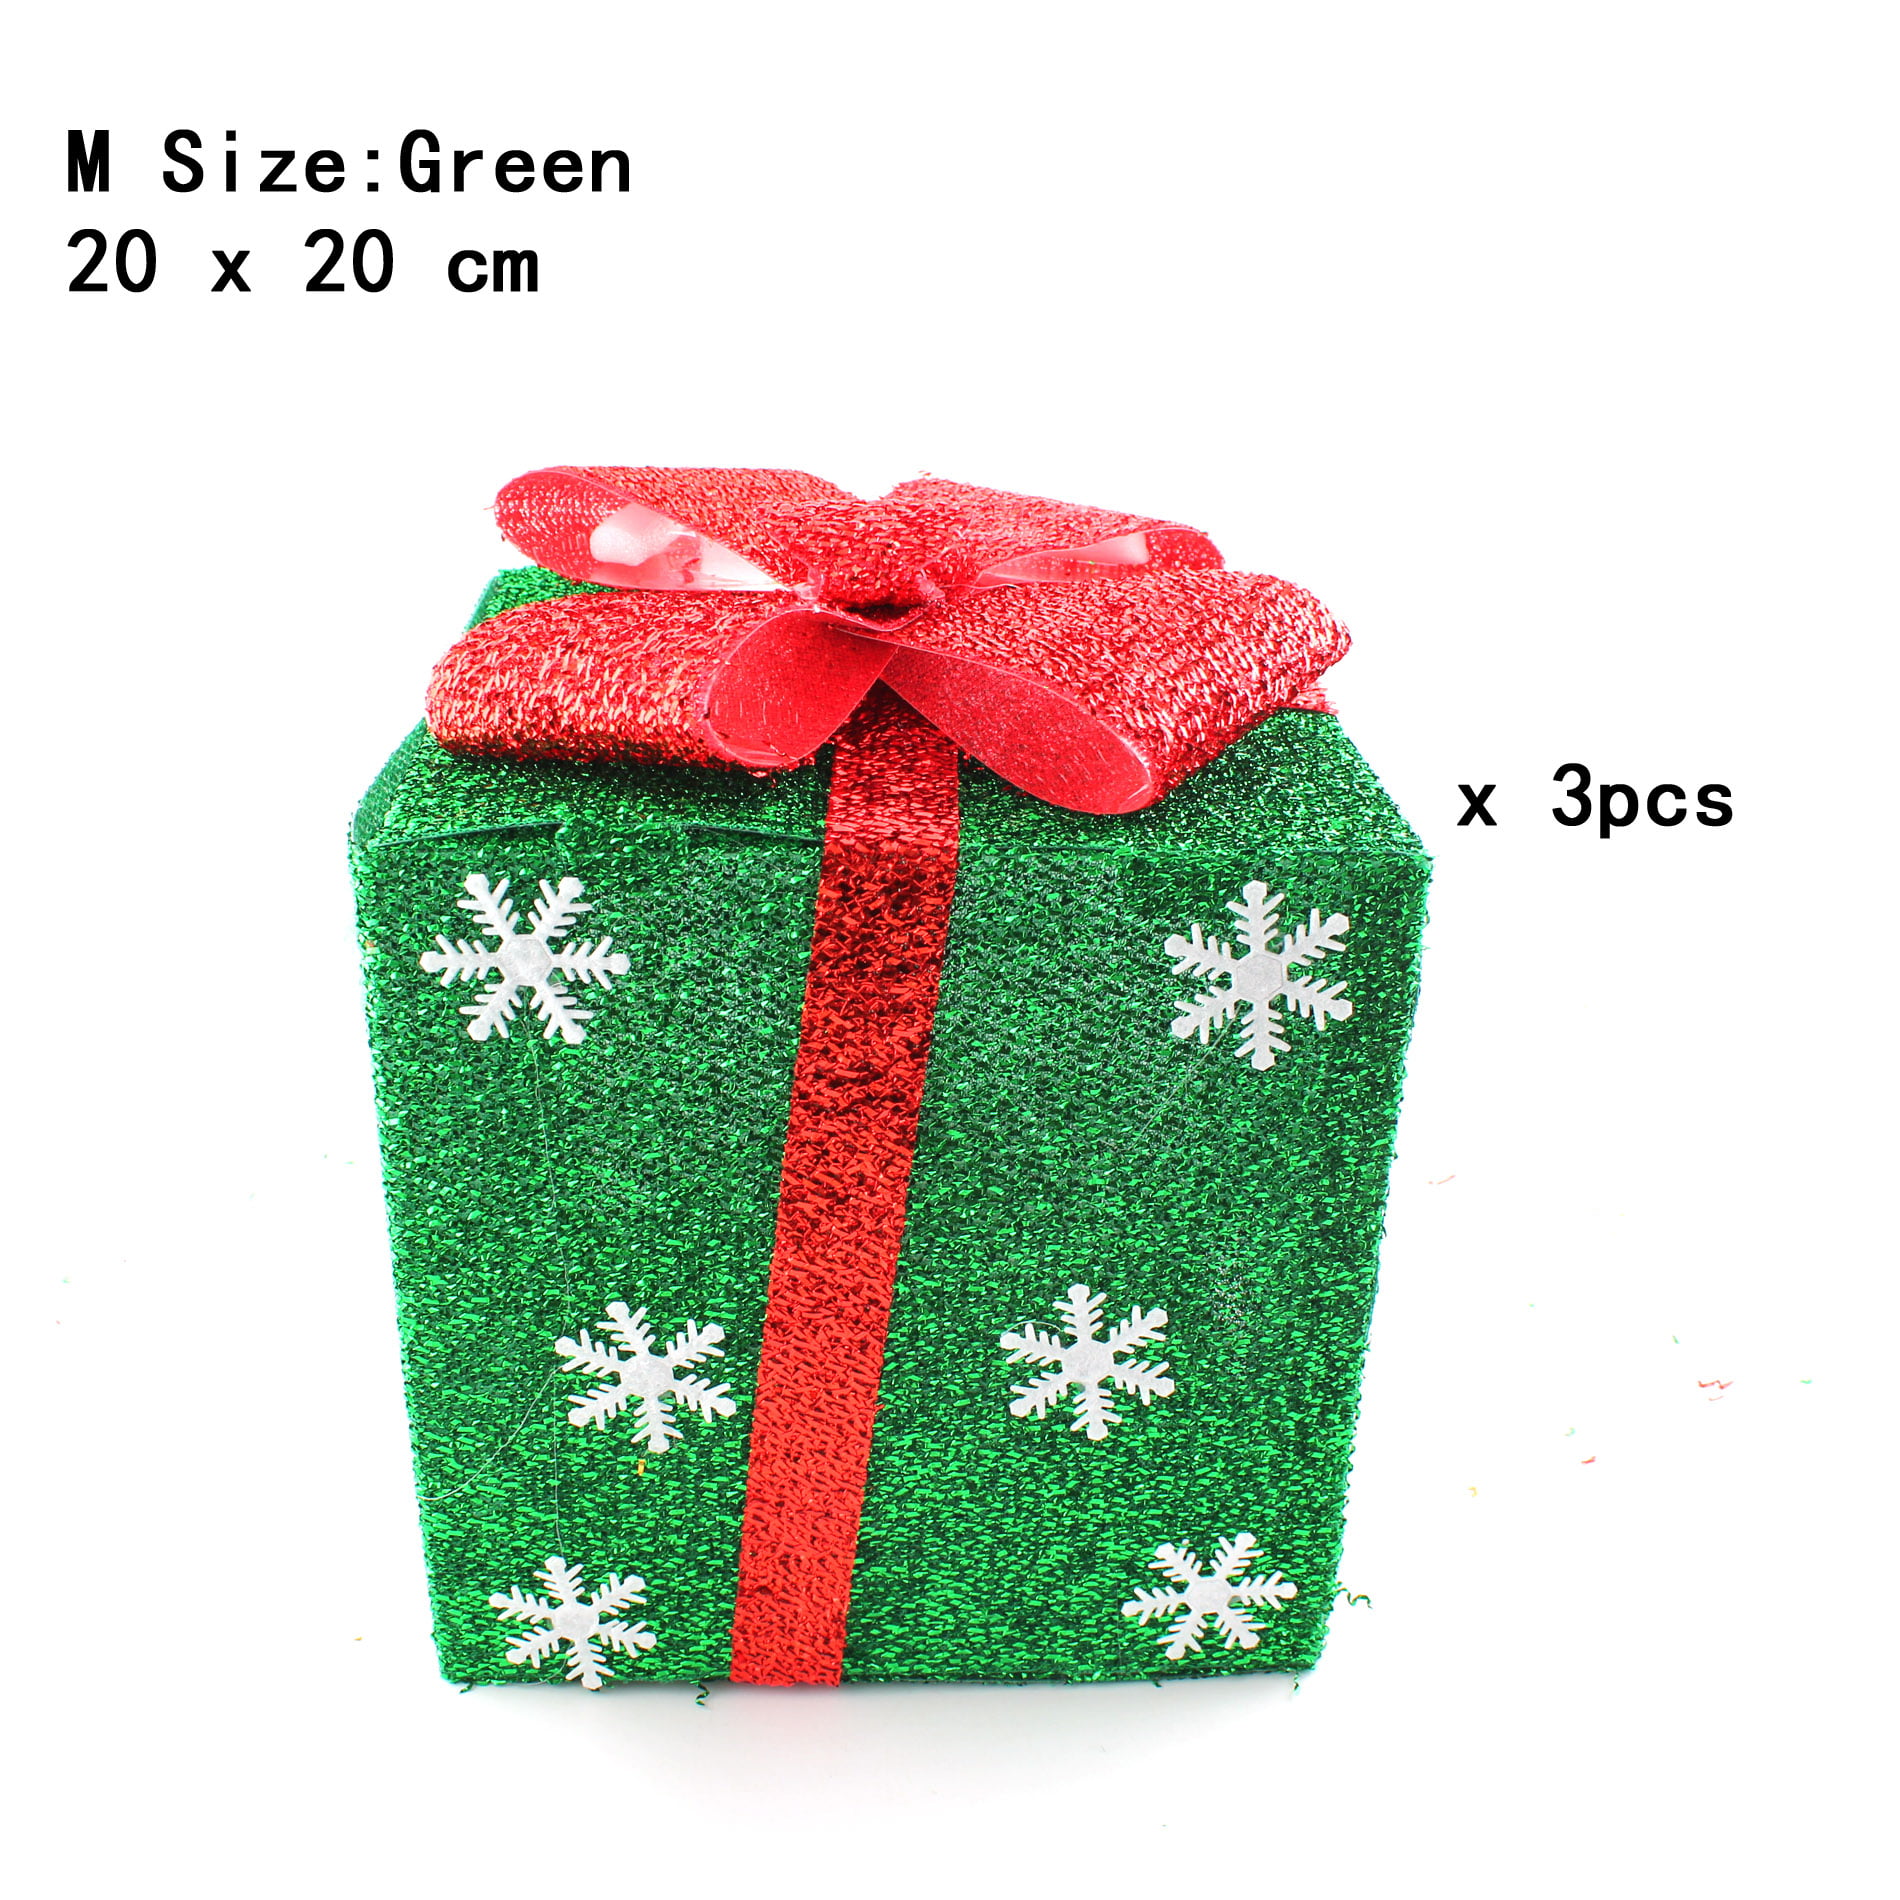 Pack of 3 Lighted Christmas Snowflakes Gift Wrap Boxes Yard Art Holiday Decoration (NOT Included LED light), Green, M